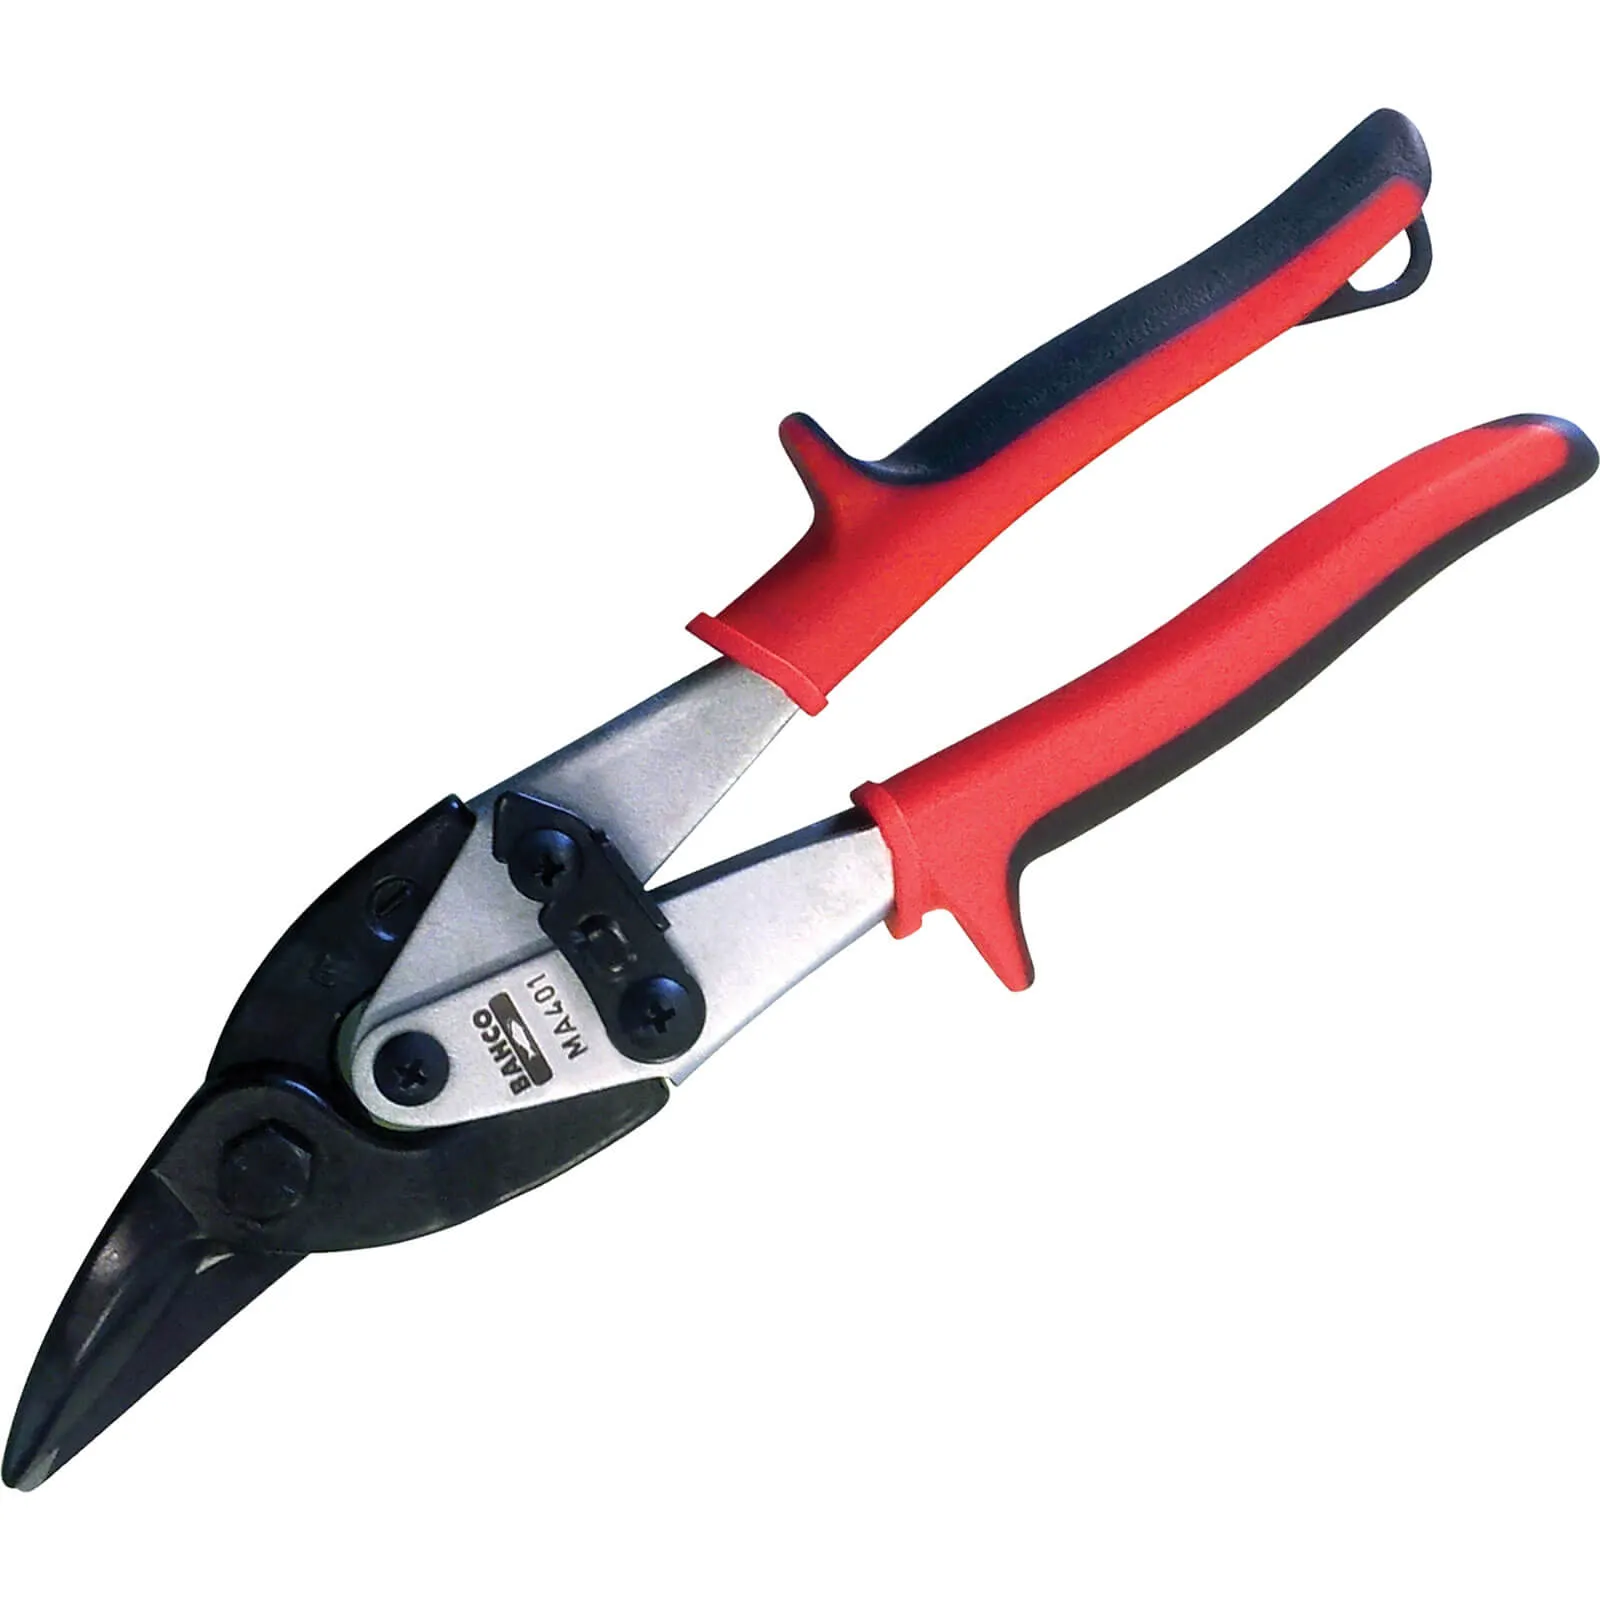 Bahco Aviation Compound Snips - Left Cut, 250mm